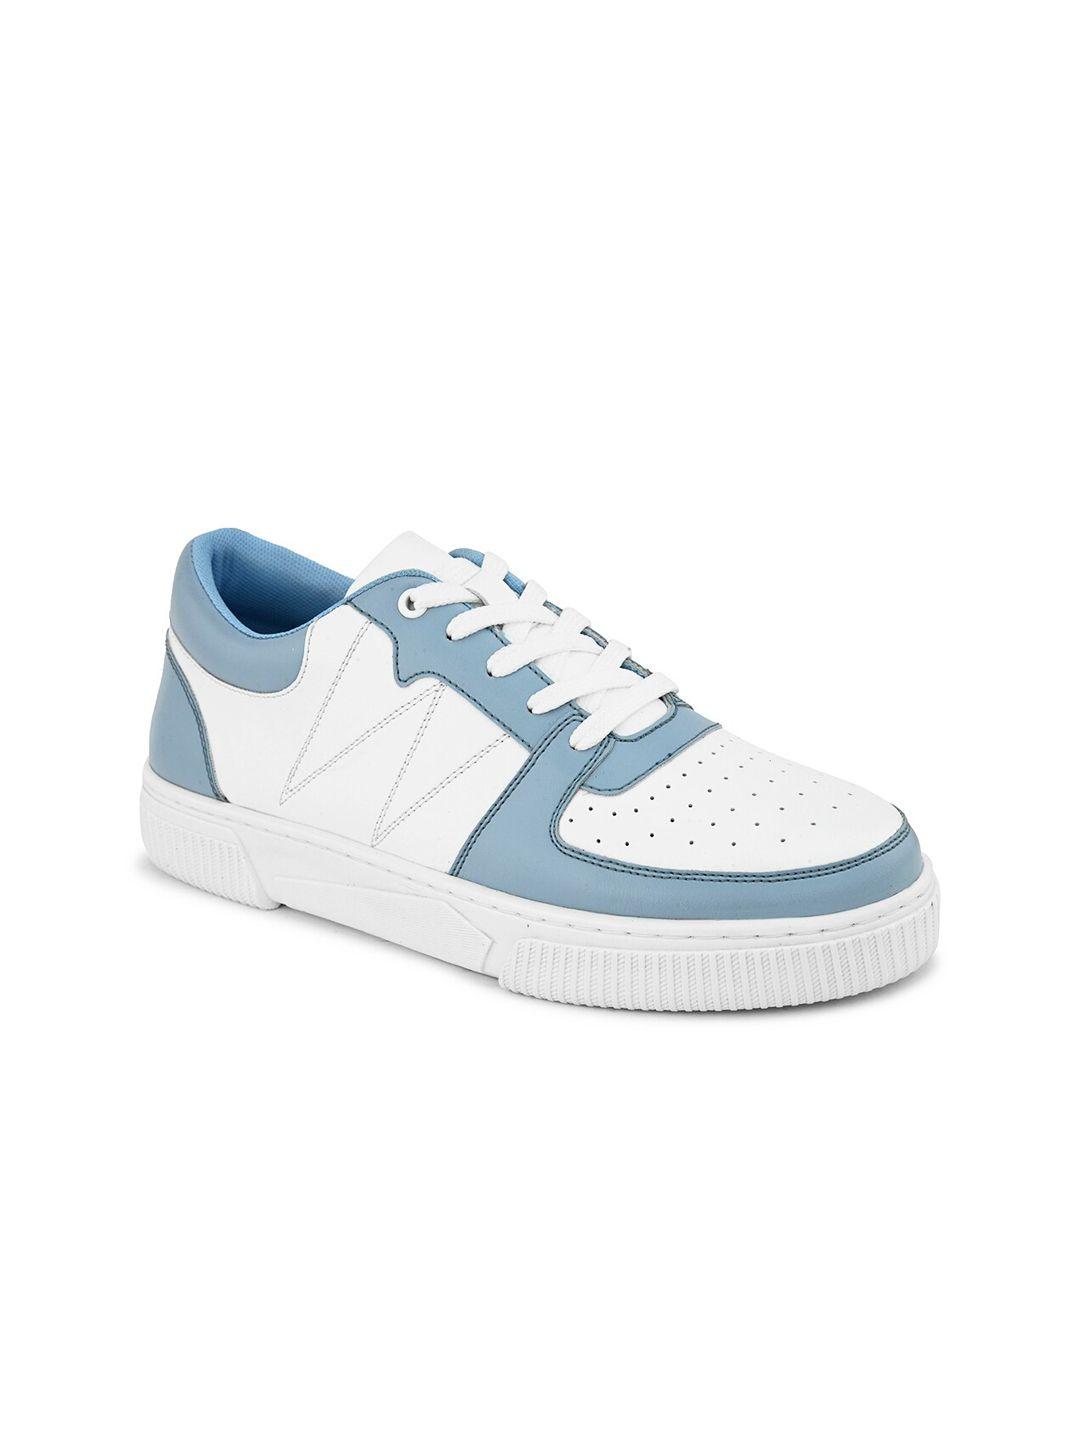 HRX by Hrithik Roshan Women White & Blue Colourblocked Lightweight Comfort Insole Sneakers